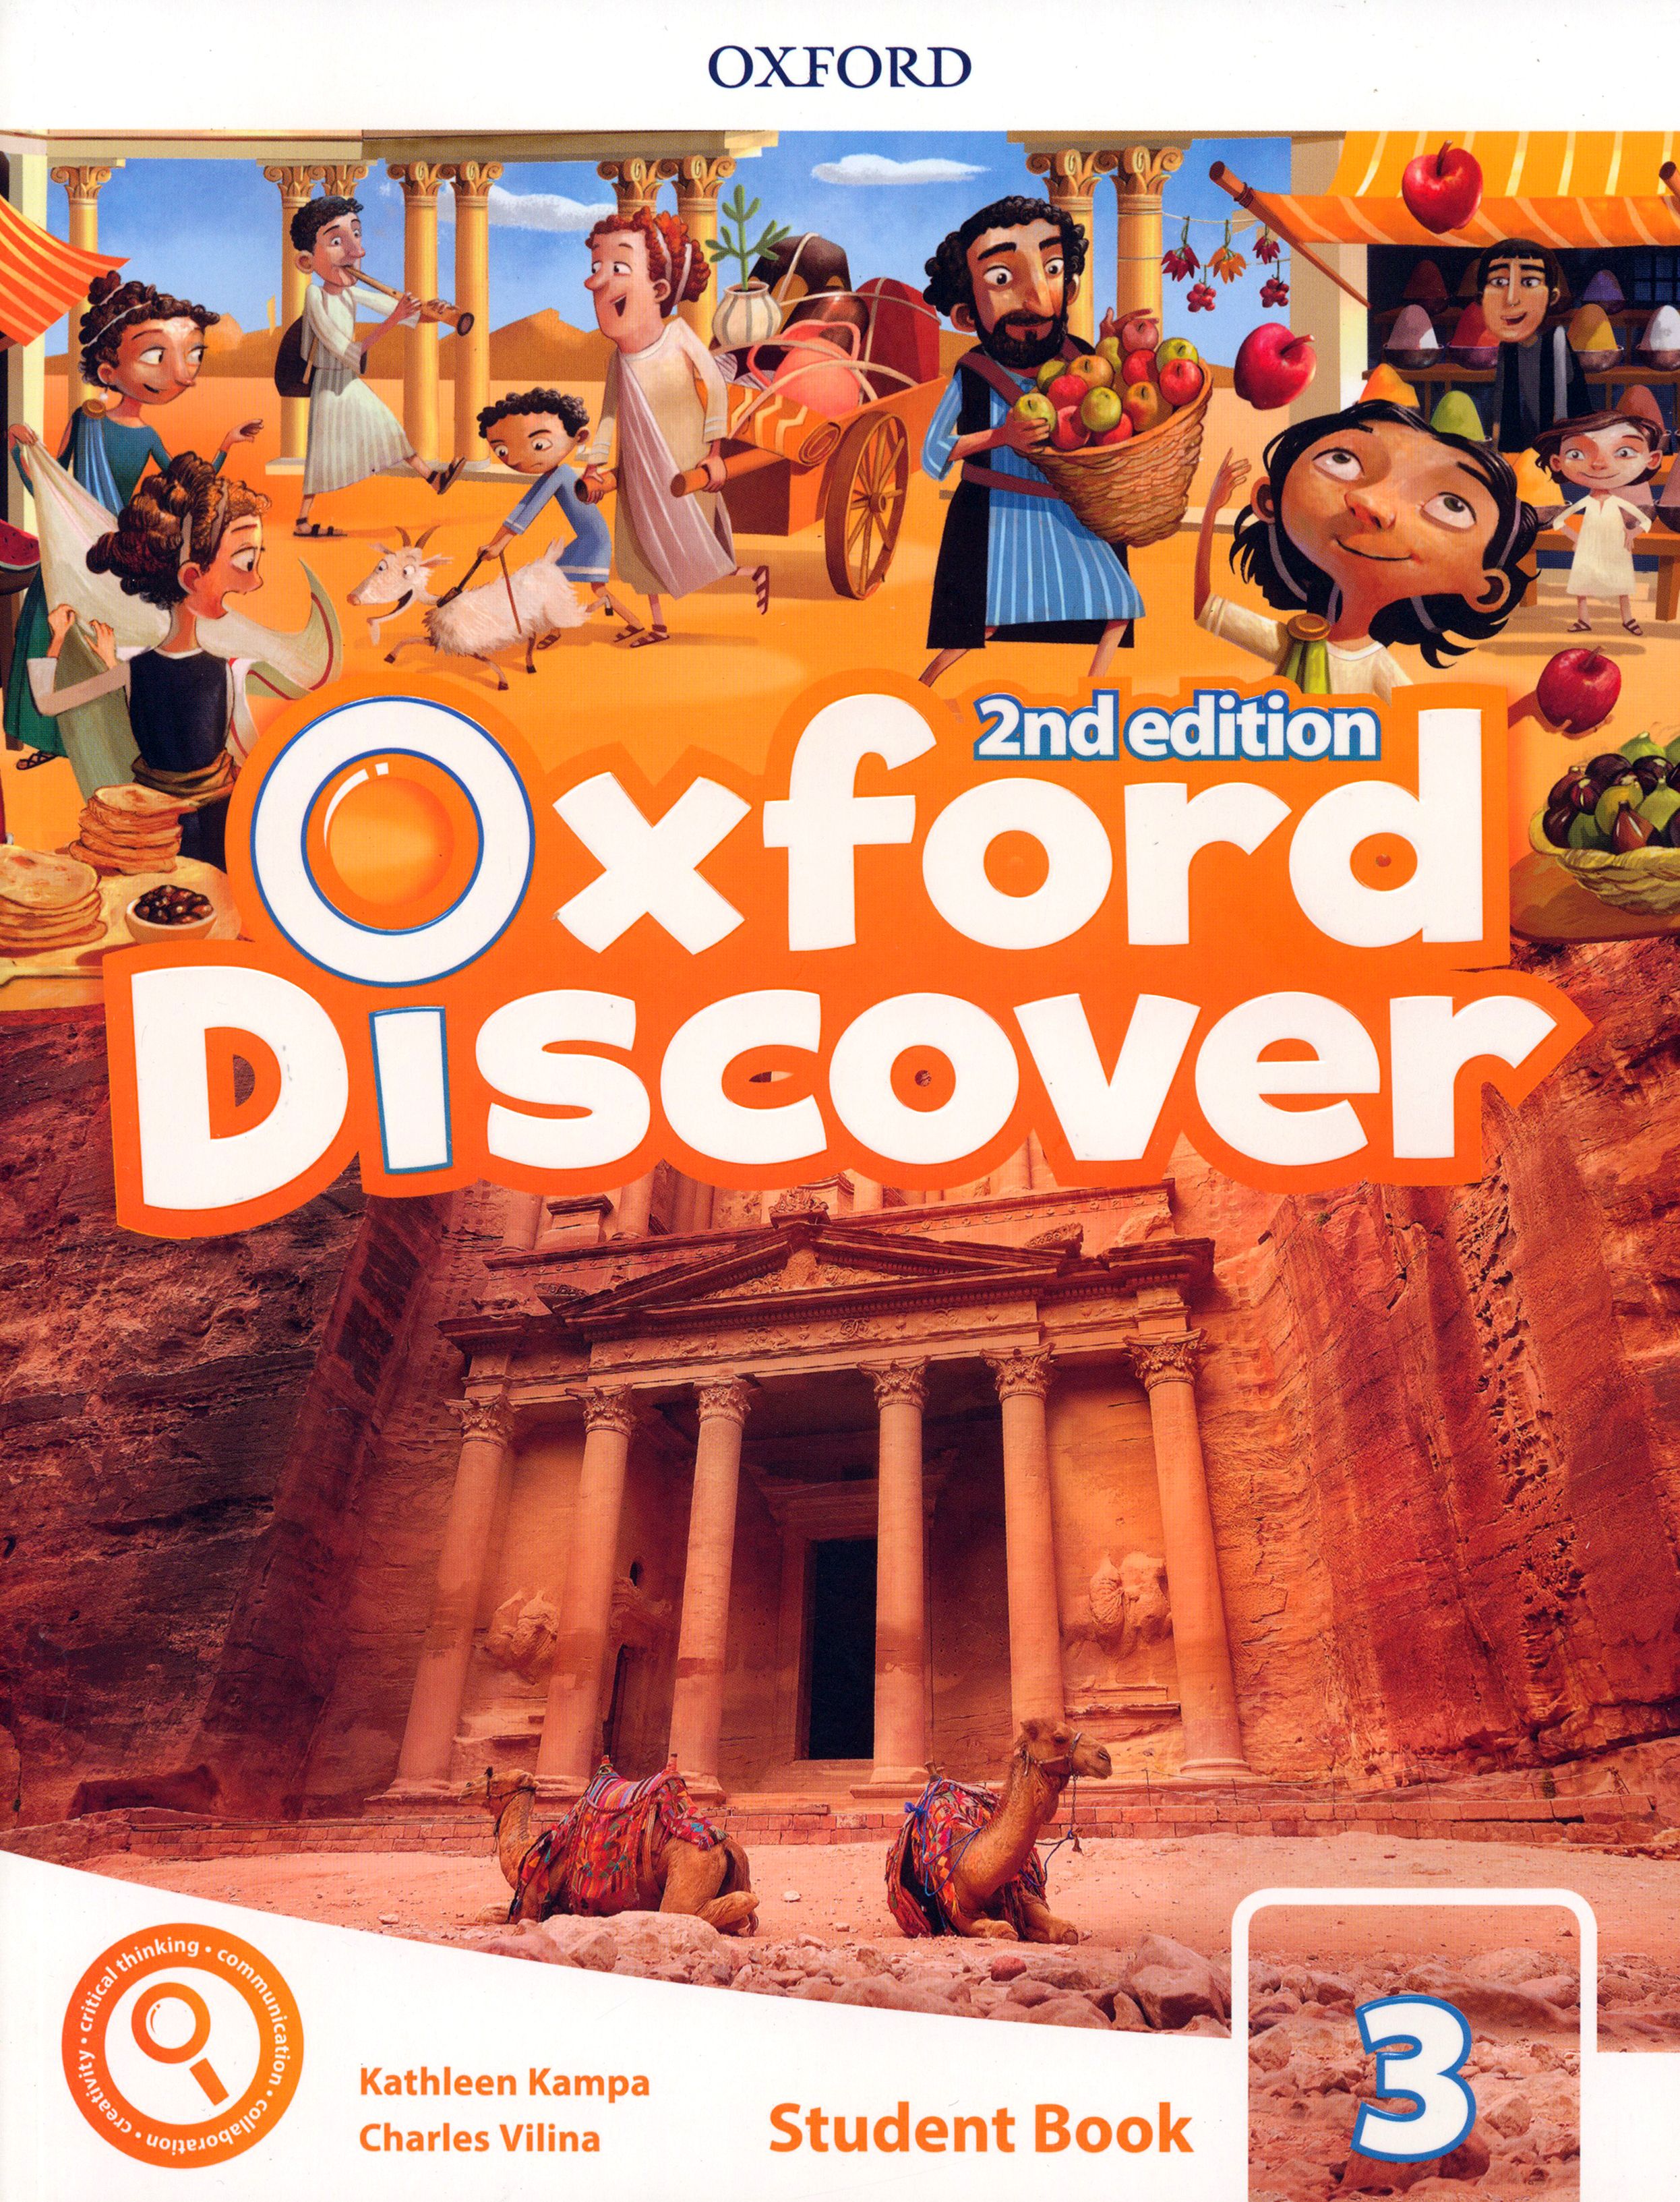 Discover students book. Oxford discover (2nd Edition) 3 student's book. Oxford discover 1 student's book 2nd Edition. Oxford discover 1 student book 2nd Edition Audio. Oxford discover 1 (student’s book, Workbook).